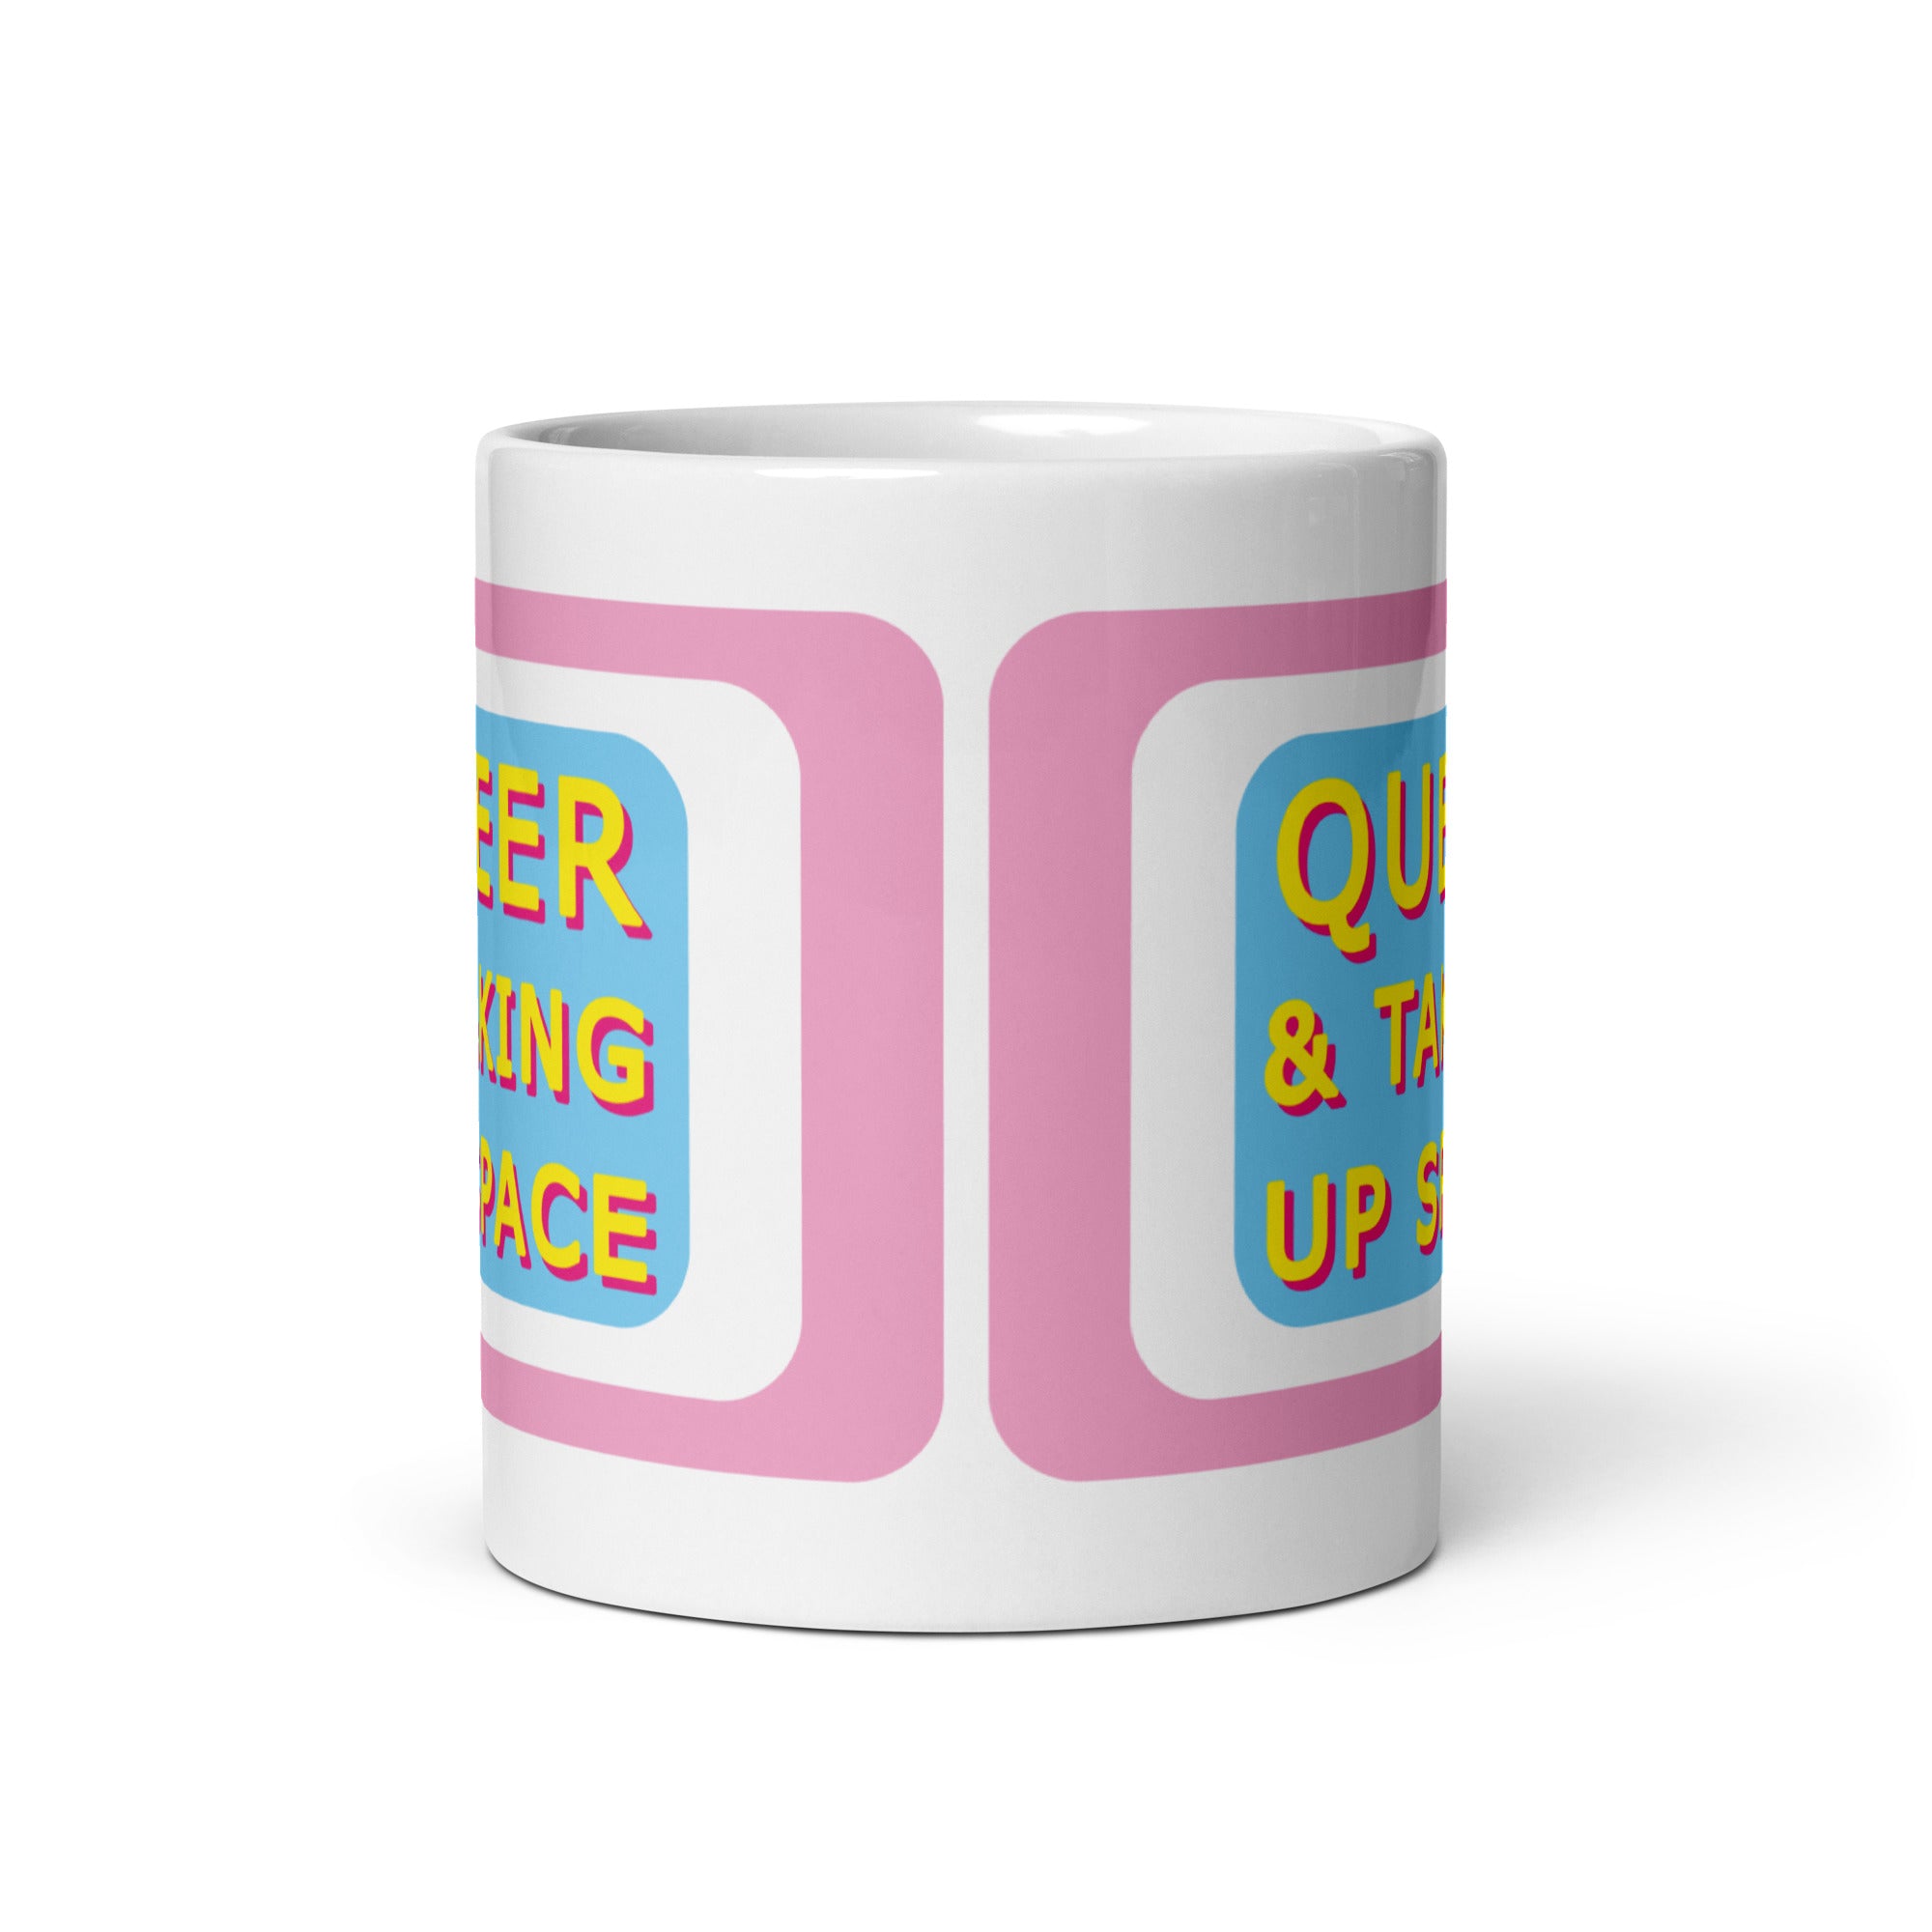 Queer & Taking Up Space Blue, White & Pink Mug